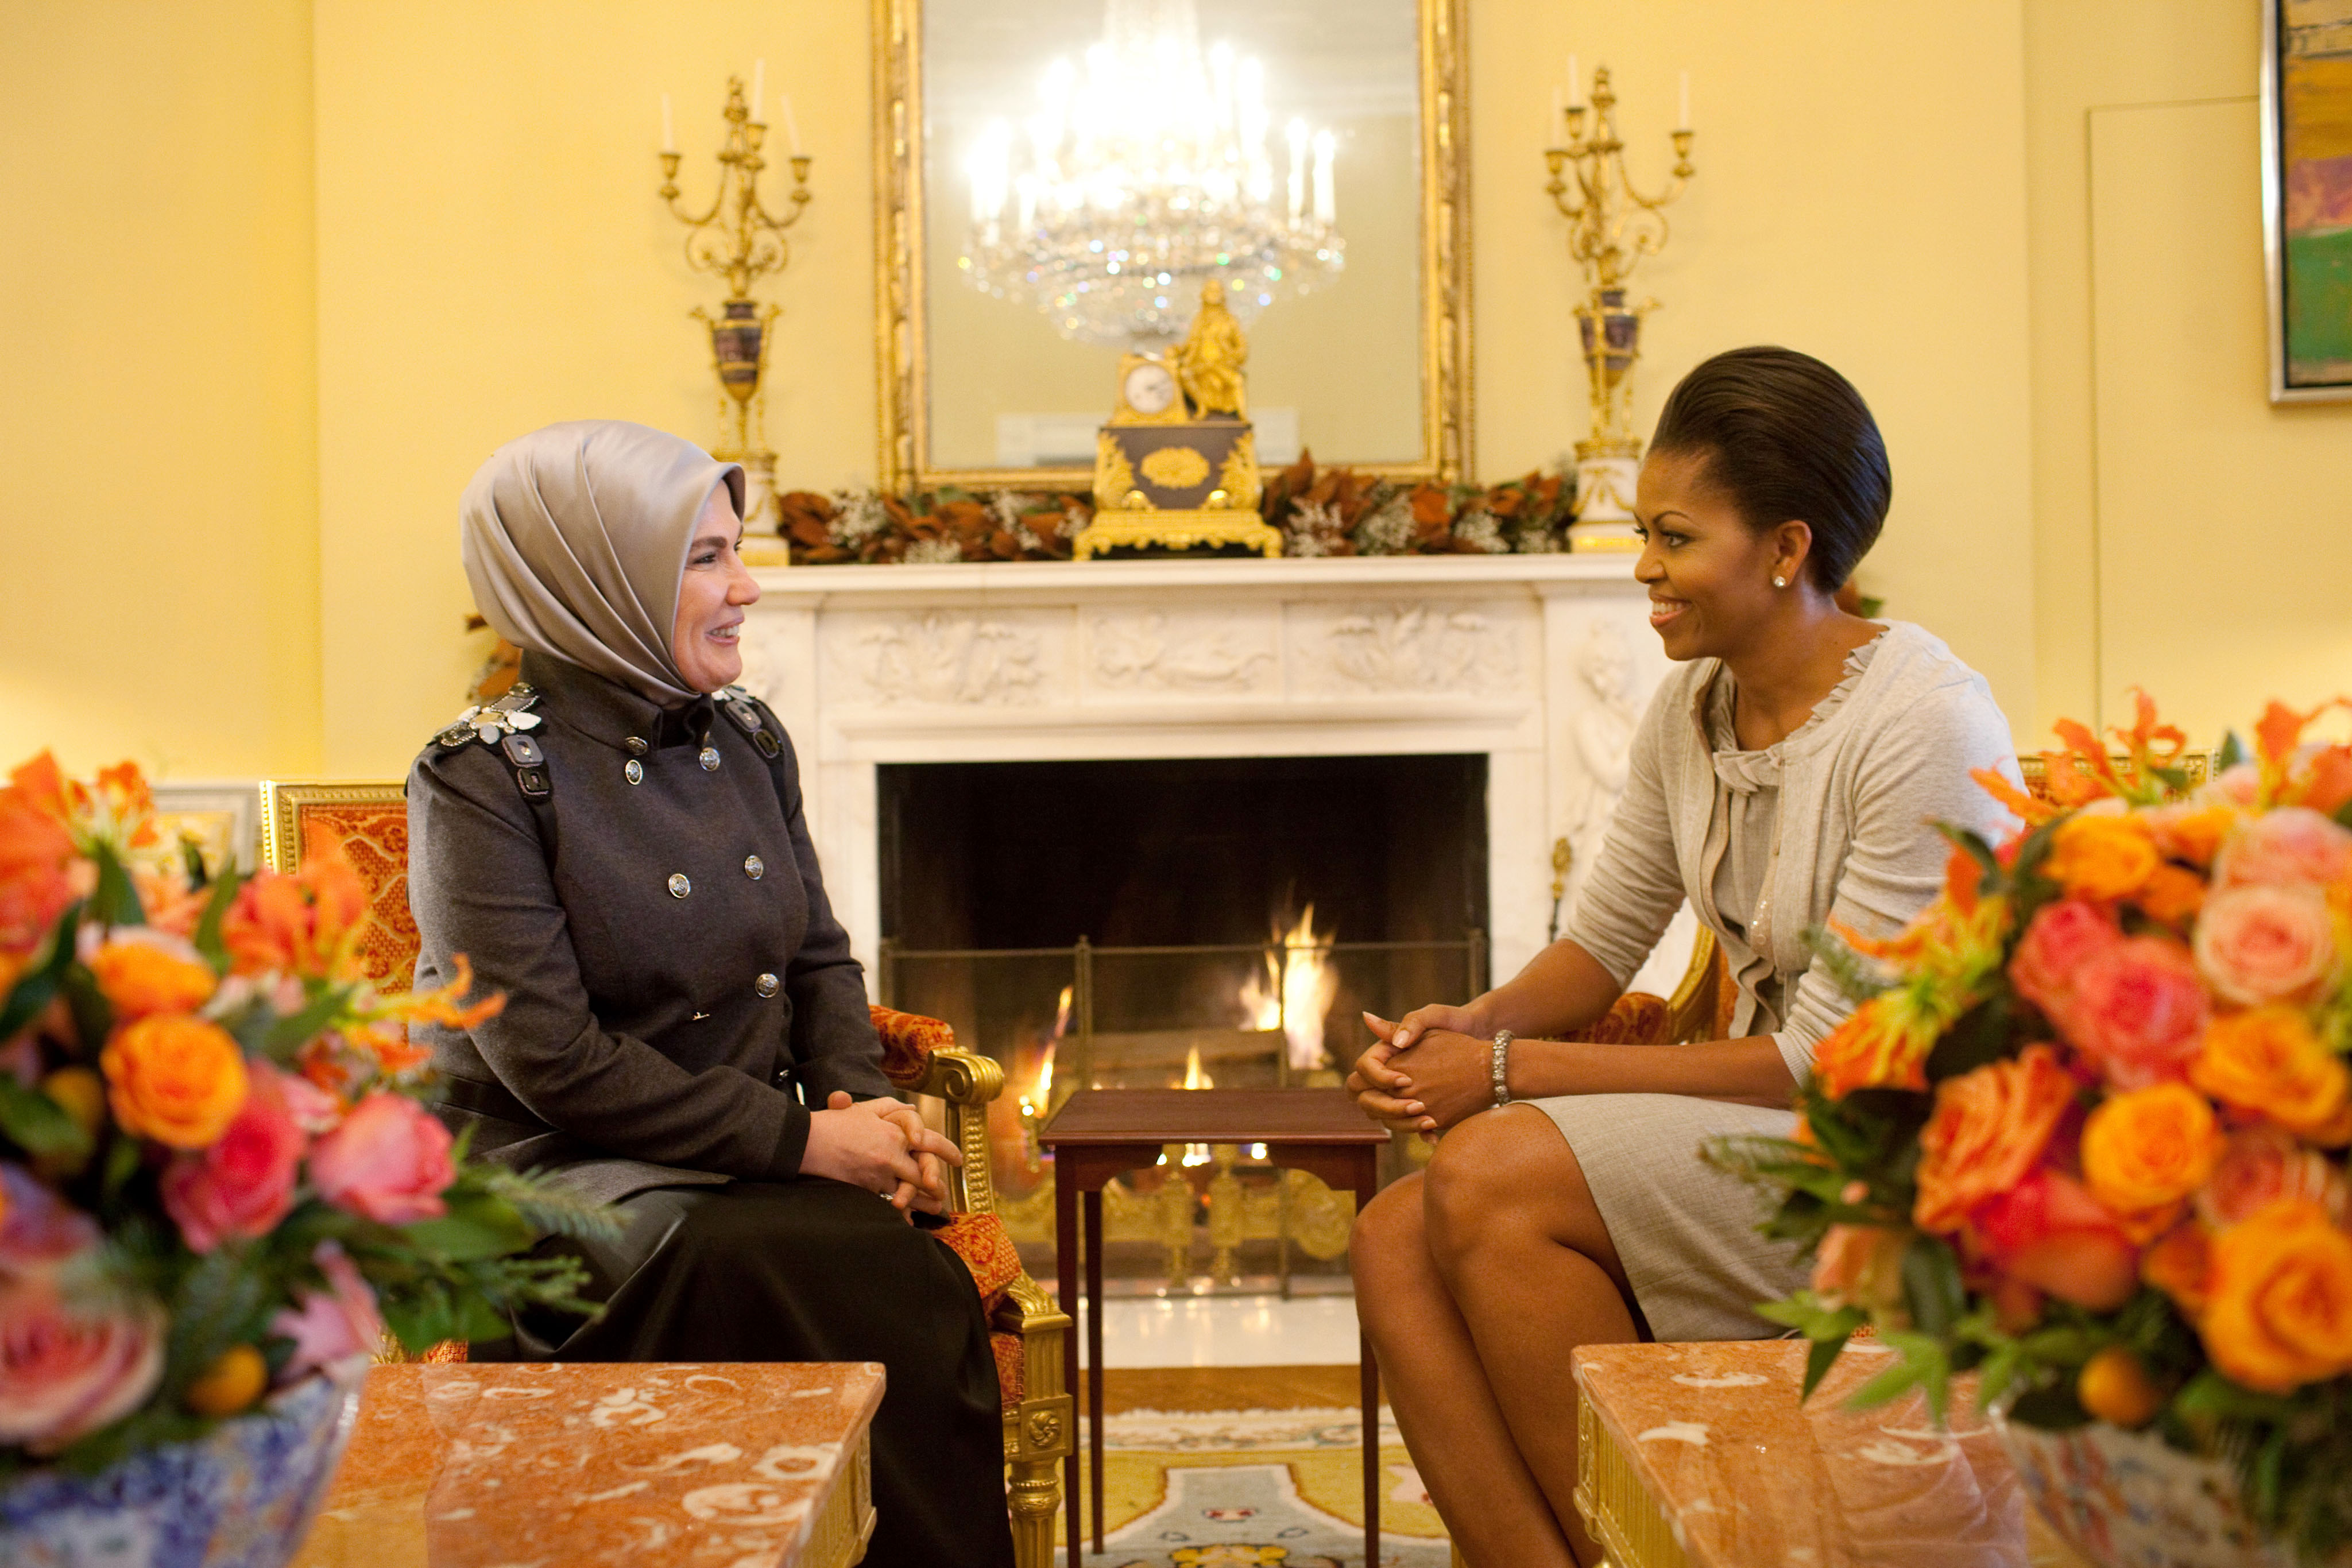 First Lady Michelle Obama Meets With Ermine Erdogan, Wife Of The Prime Minister of Turkey